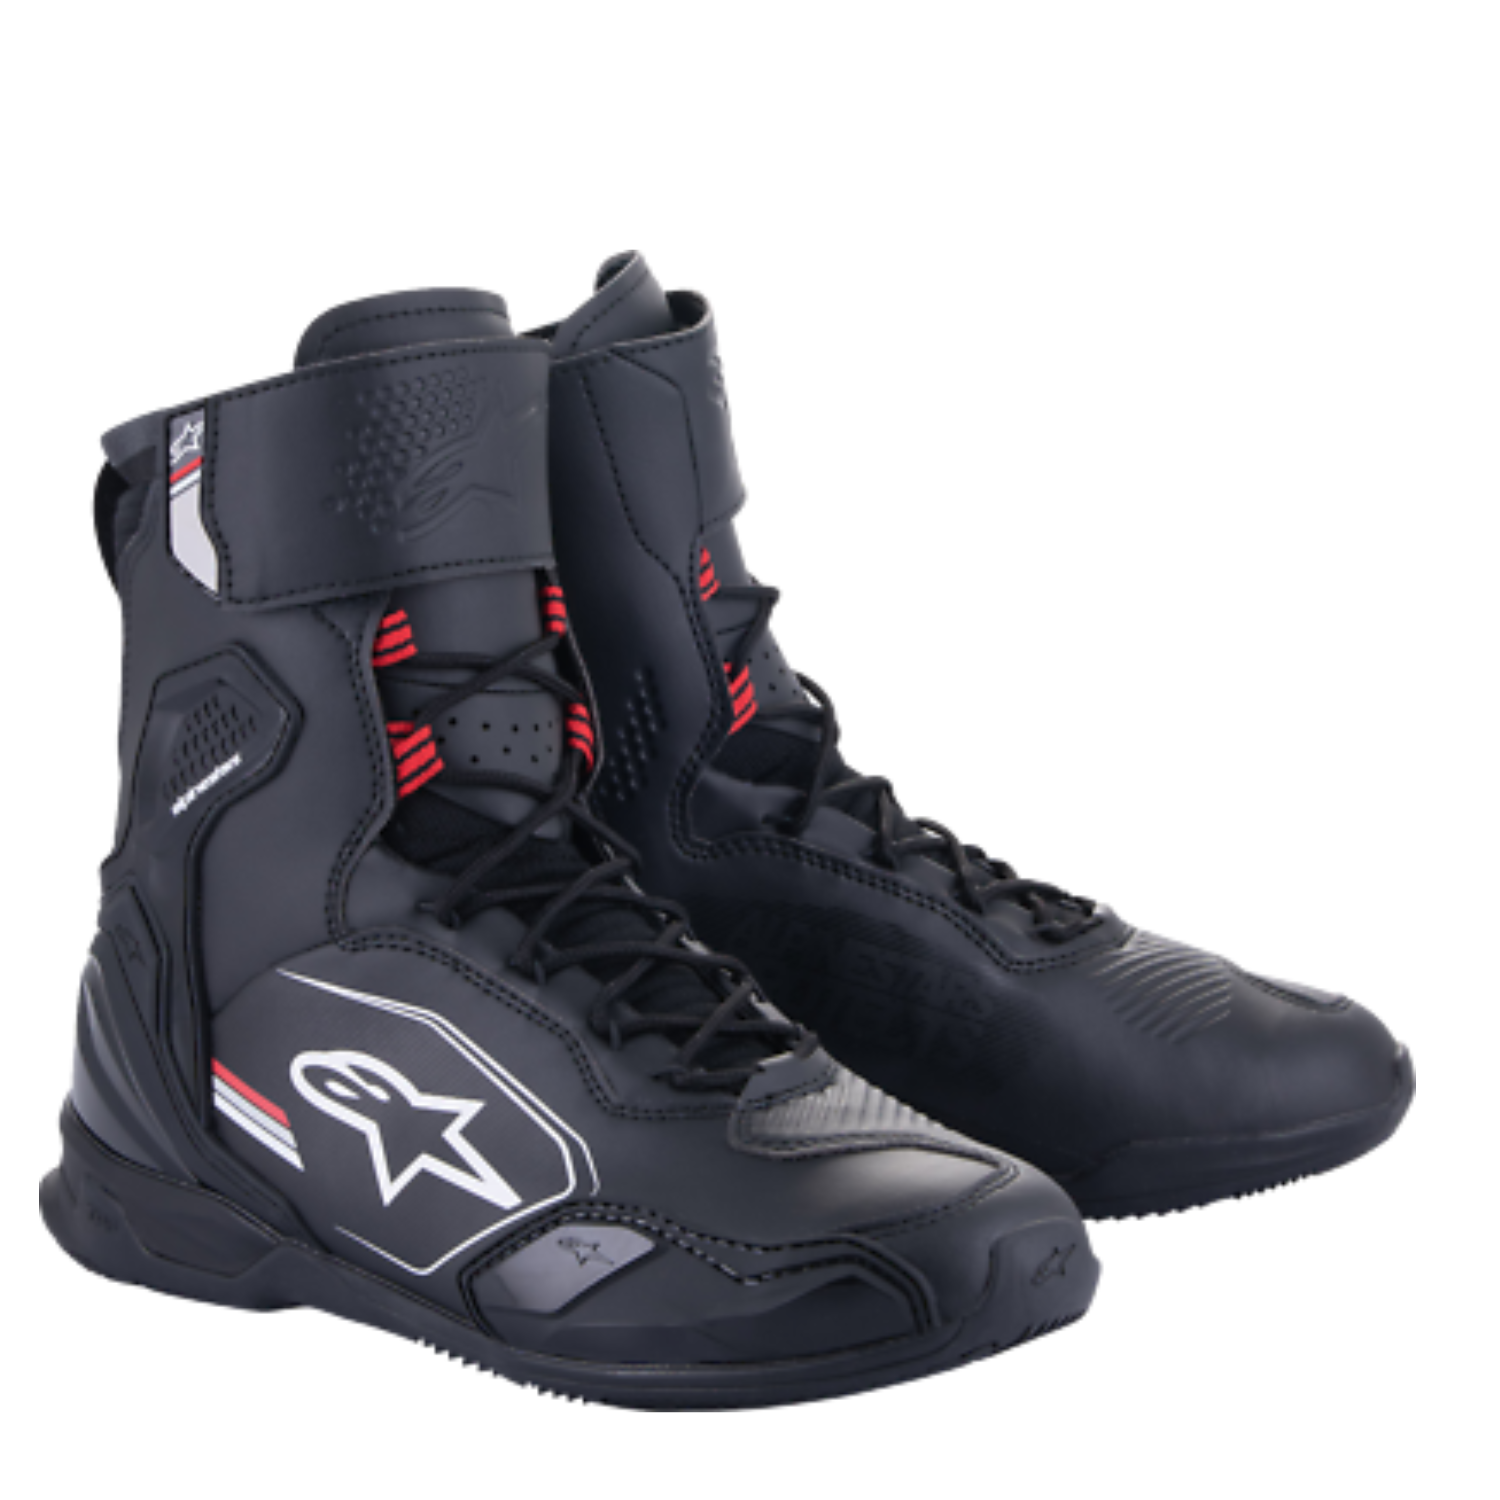 Image of Alpinestars Superfaster Shoes Black Gray Bright Red Size US 8 ID 8059347260785